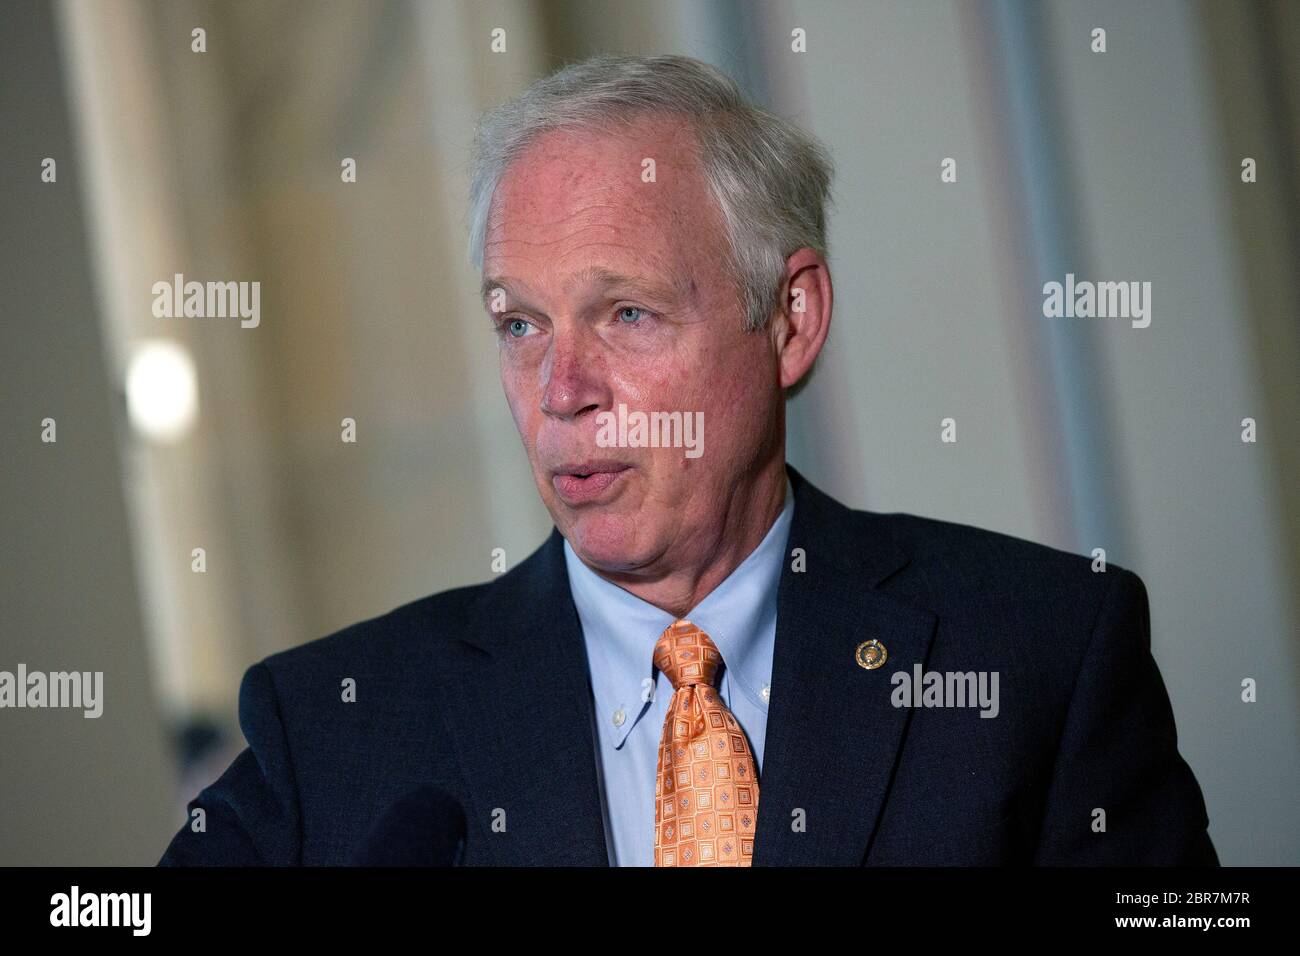 Washington, United States Of America. 20th May, 2020. United States Senator Ron Johnson (Republican of Wisconsin) speaks to members of the media prior to a U.S. Senate Committee on Homeland Security and Governmental Affairs meeting in the Senate Russell Office Building in Washington, DC, U.S., on Wednesday, May 20, 2020, as the committee considers a motion to issue a subpoena to Blue Star Strategies. Credit: Stefani Reynolds/CNP/AdMedia/Newscom/Alamy Live News Stock Photo